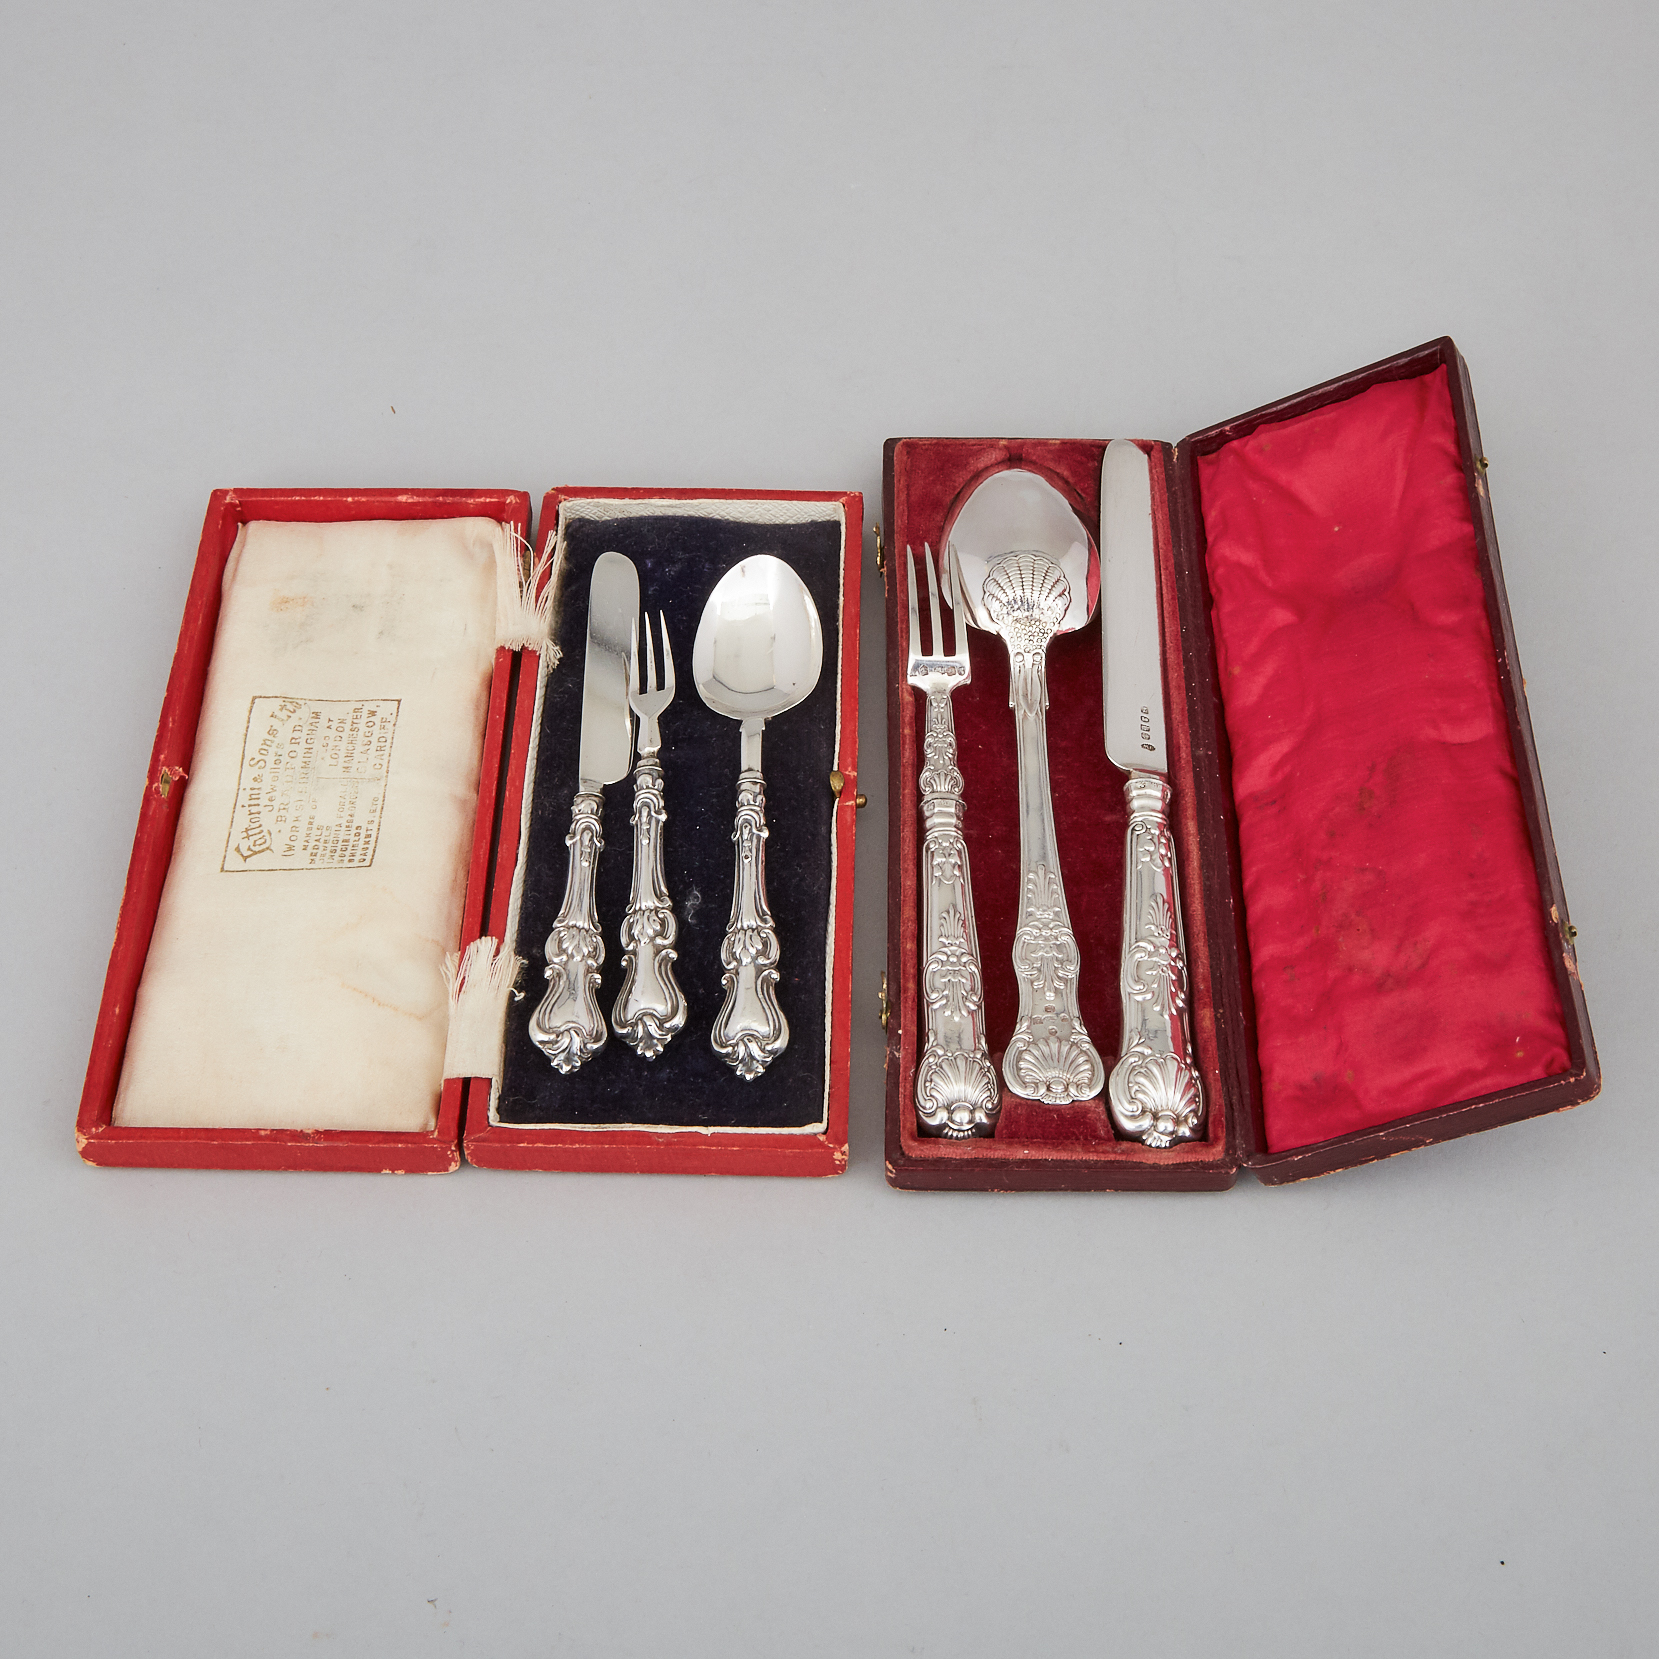 Two Late Georgian and Victorian Silver Children's Knife Fork and Spoon Sets, Hillard & Thomason and Joseph Willmore, Birmingham, 1850/51 and 1832/33